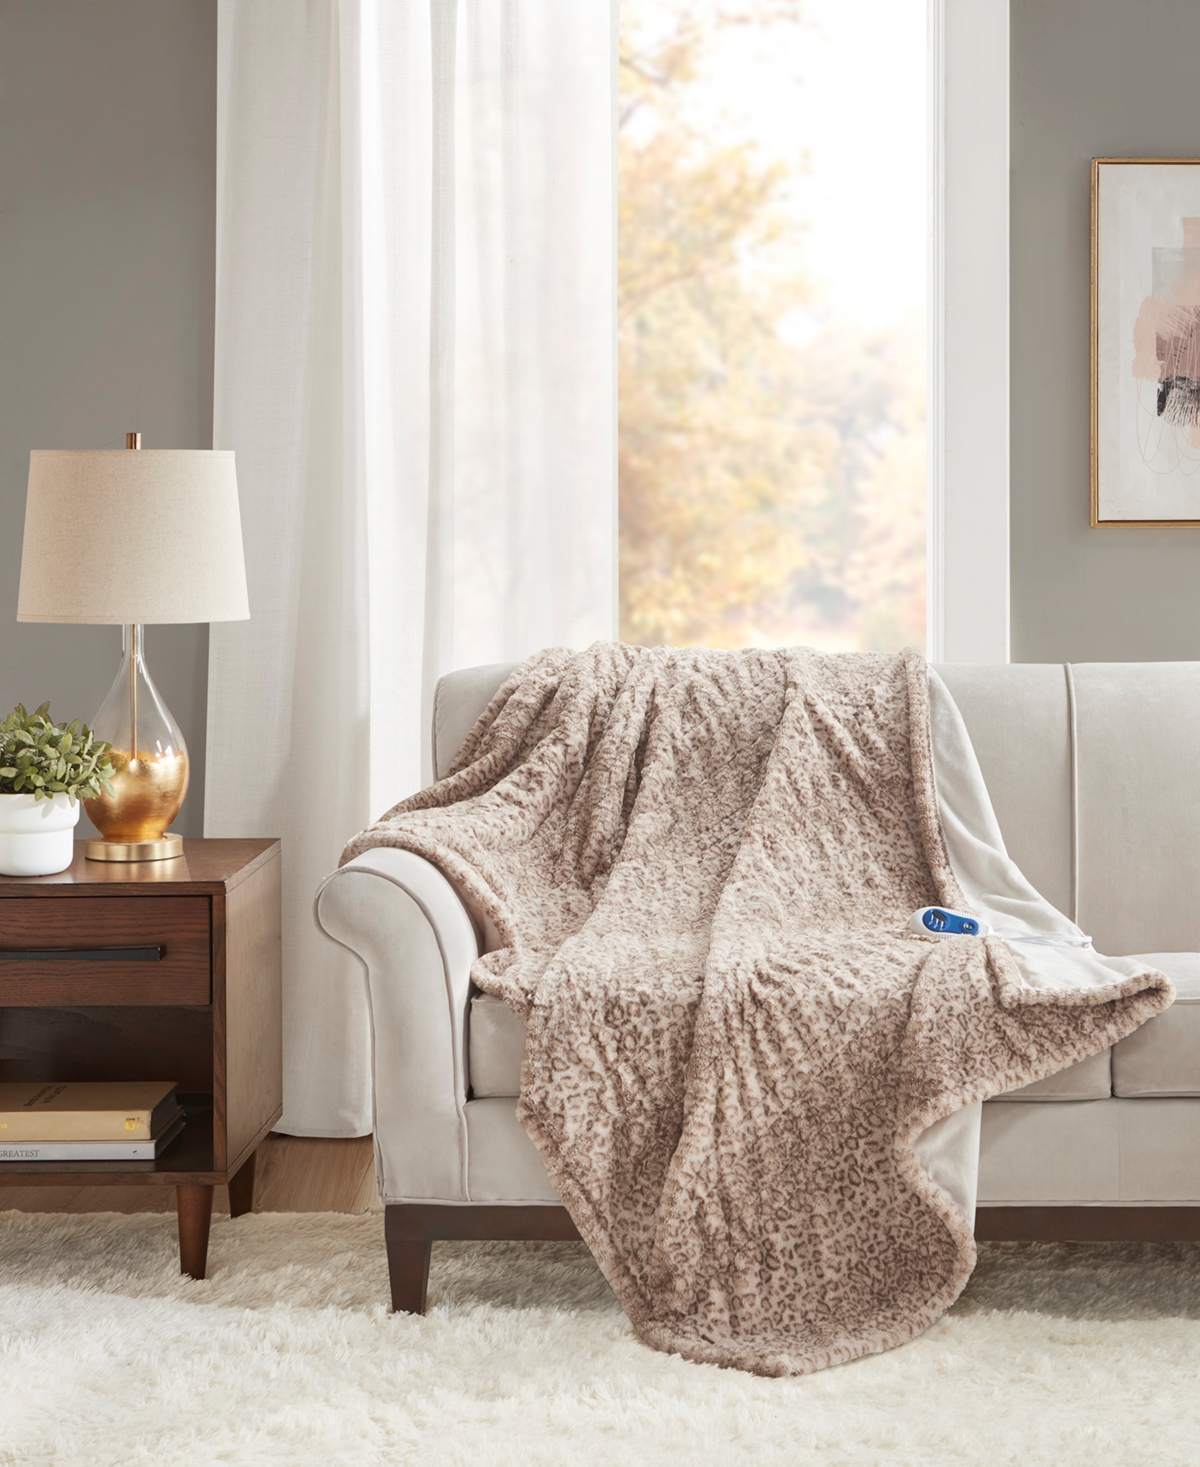 Premier Comfort Electric Faux-fur Throw, Created For Macy's Bedding In Tan